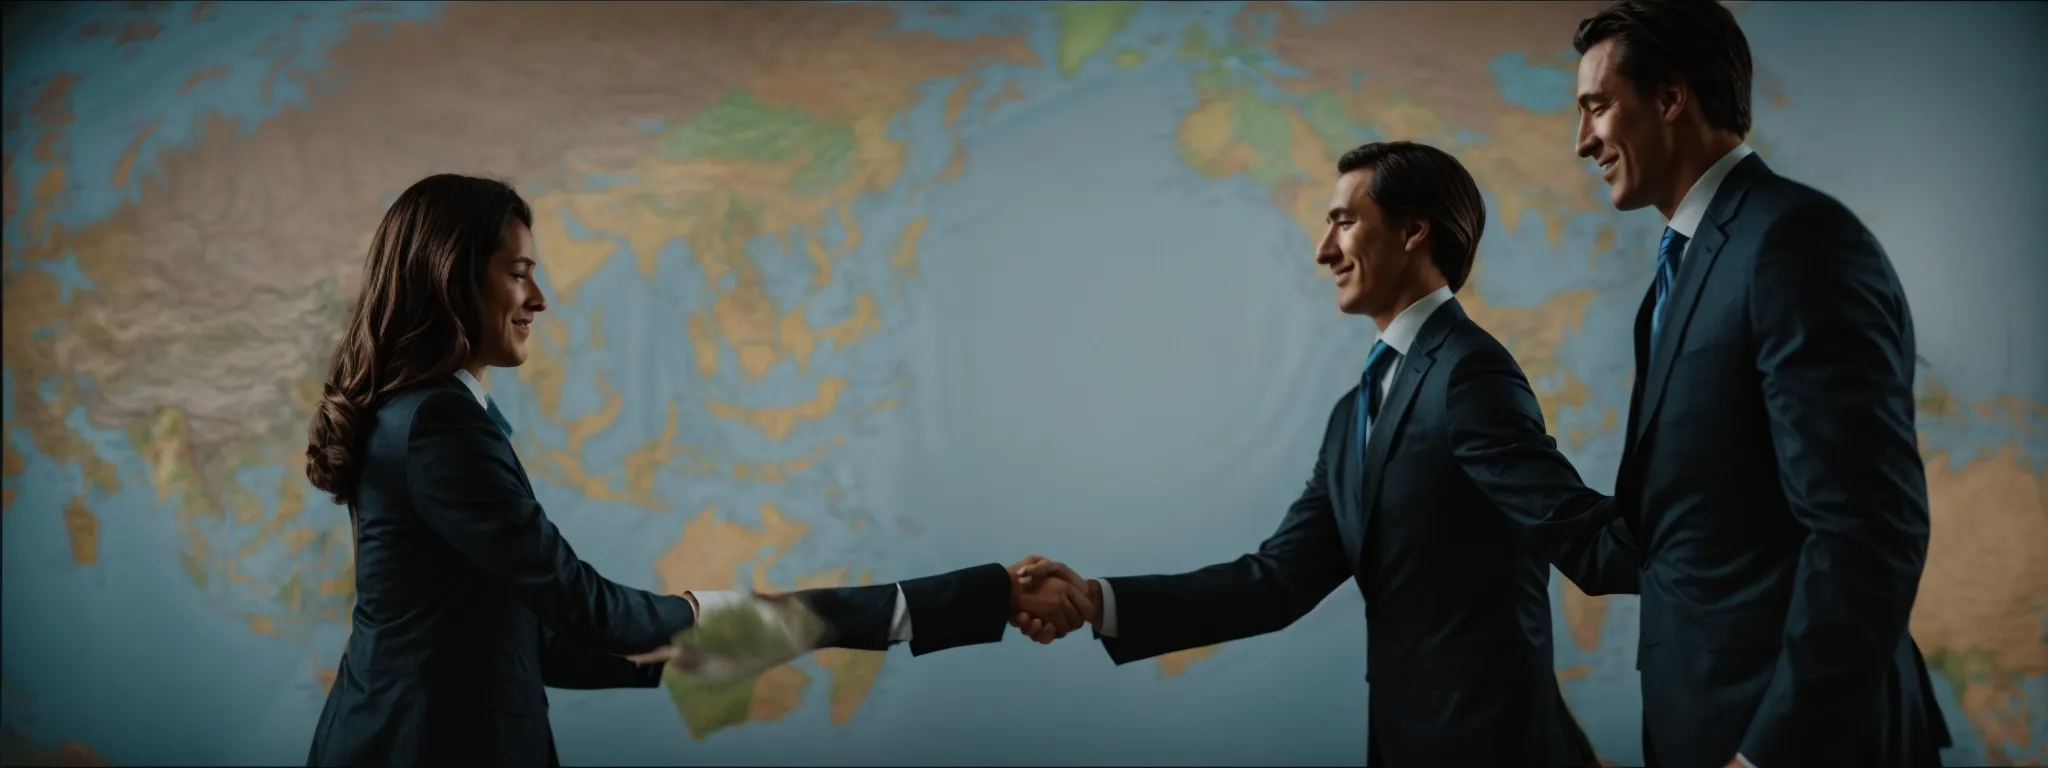 two corporate professionals shaking hands in front of a world map, symbolizing international agreement.